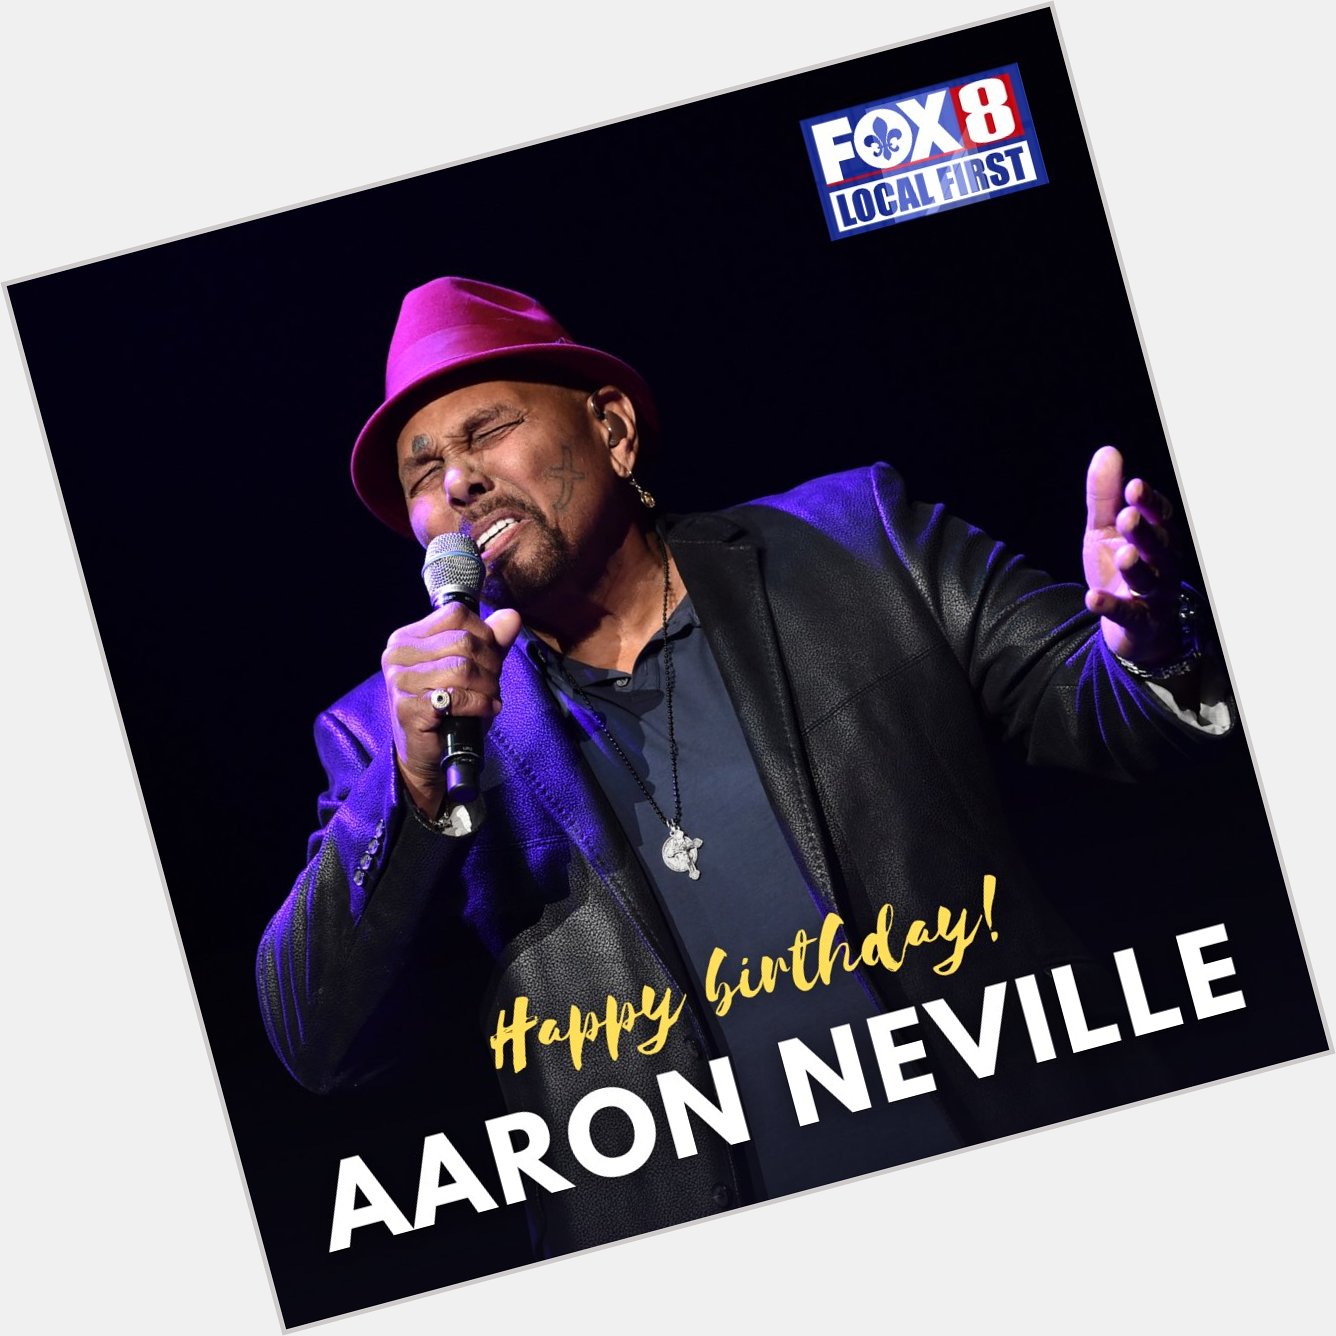 Happy 82nd birthday to a New Orleans original, soul singer Aaron Neville! 